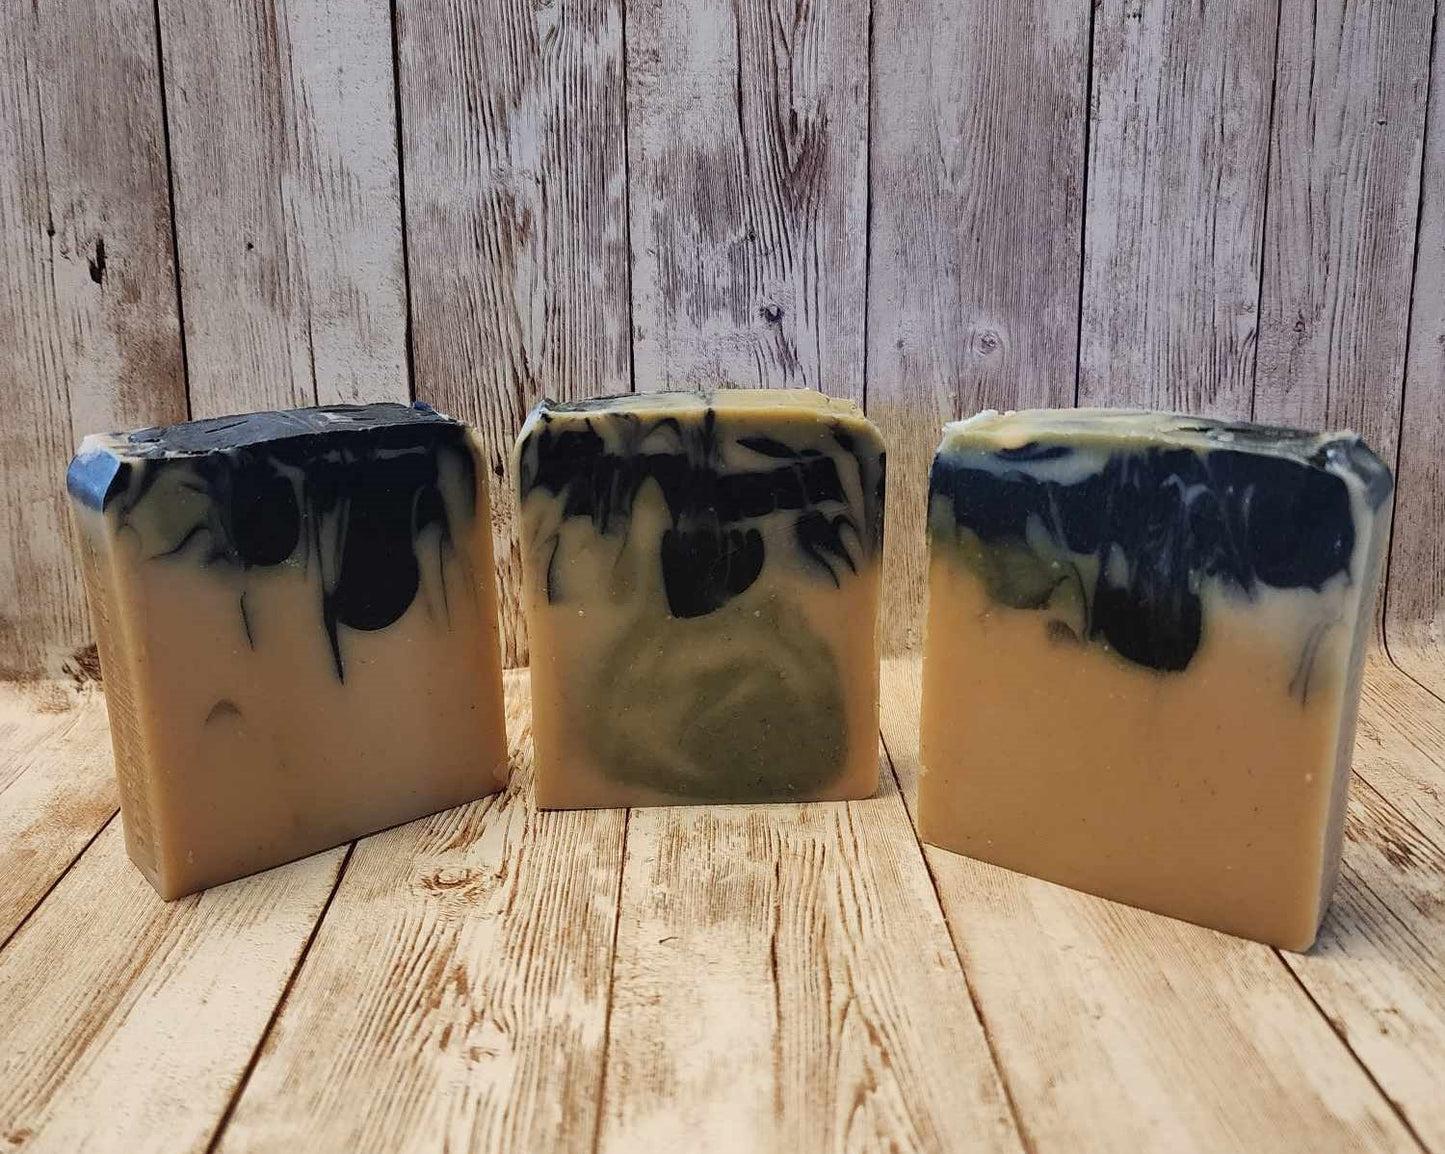 Bamboo & Teakwood Mighty Collection Goat Milk soap